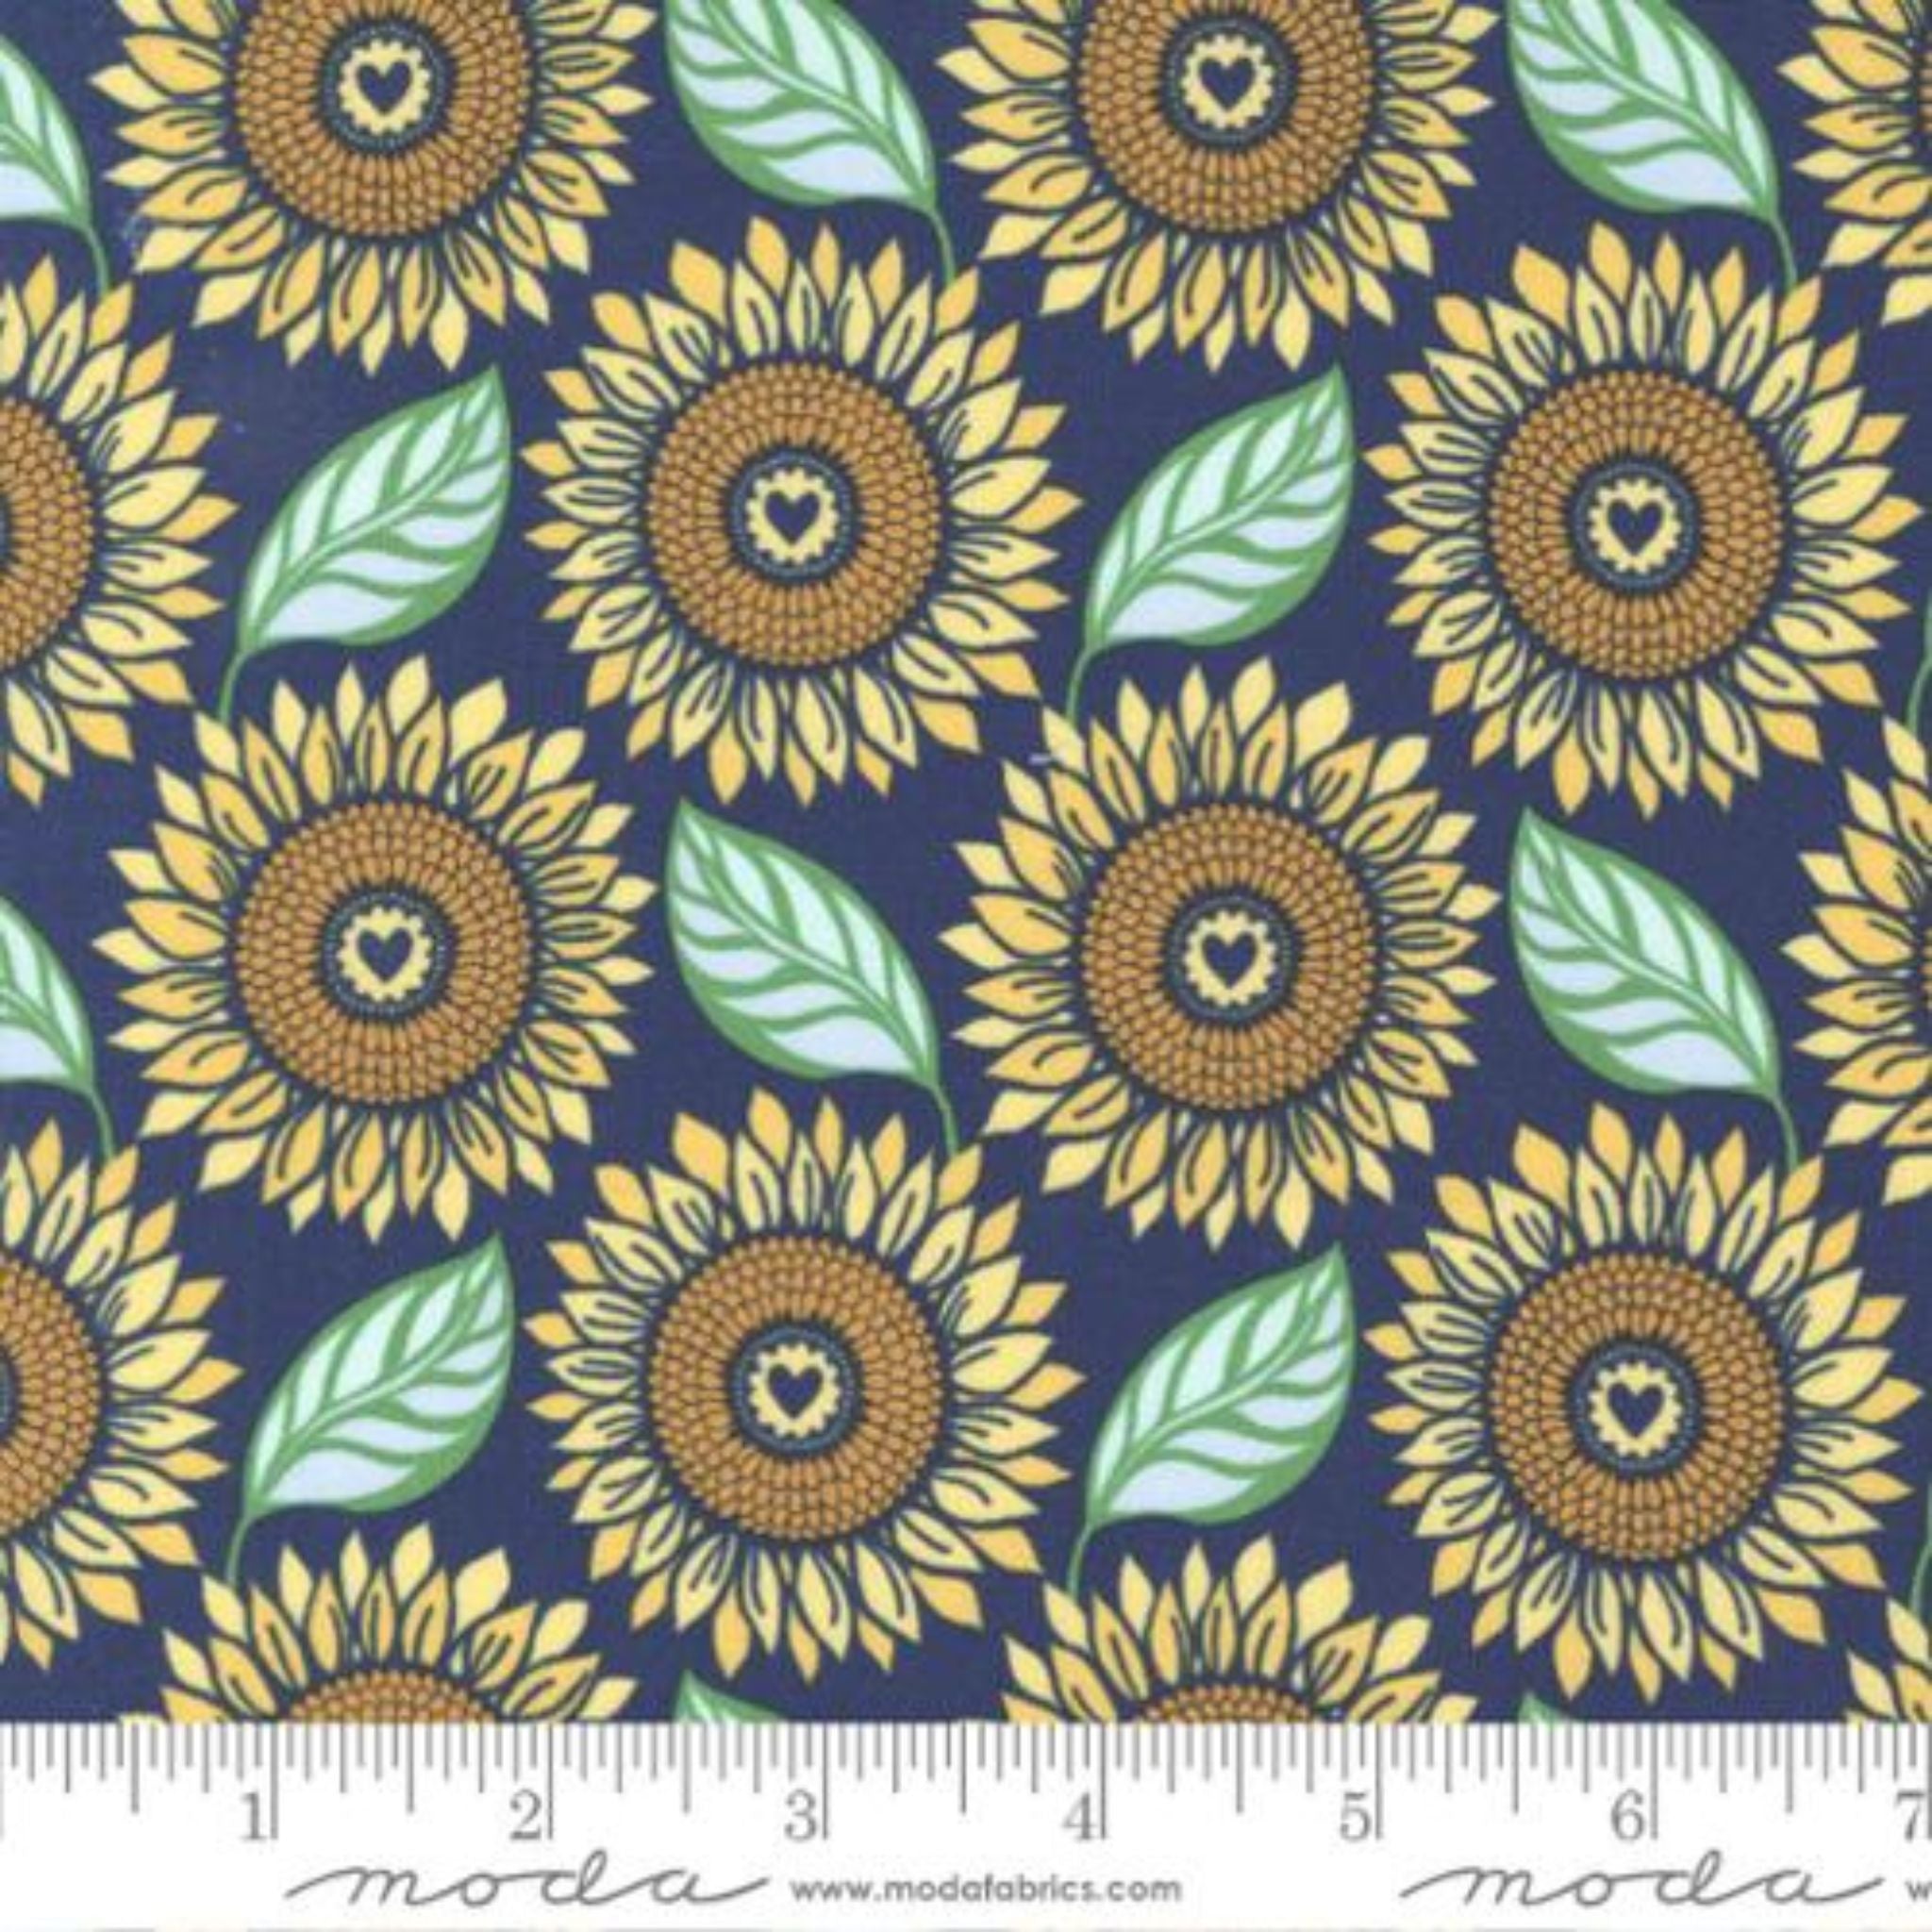 Large yellow sunflowers on a navy cotton fabric - Sunflowers in my Heart - Moda